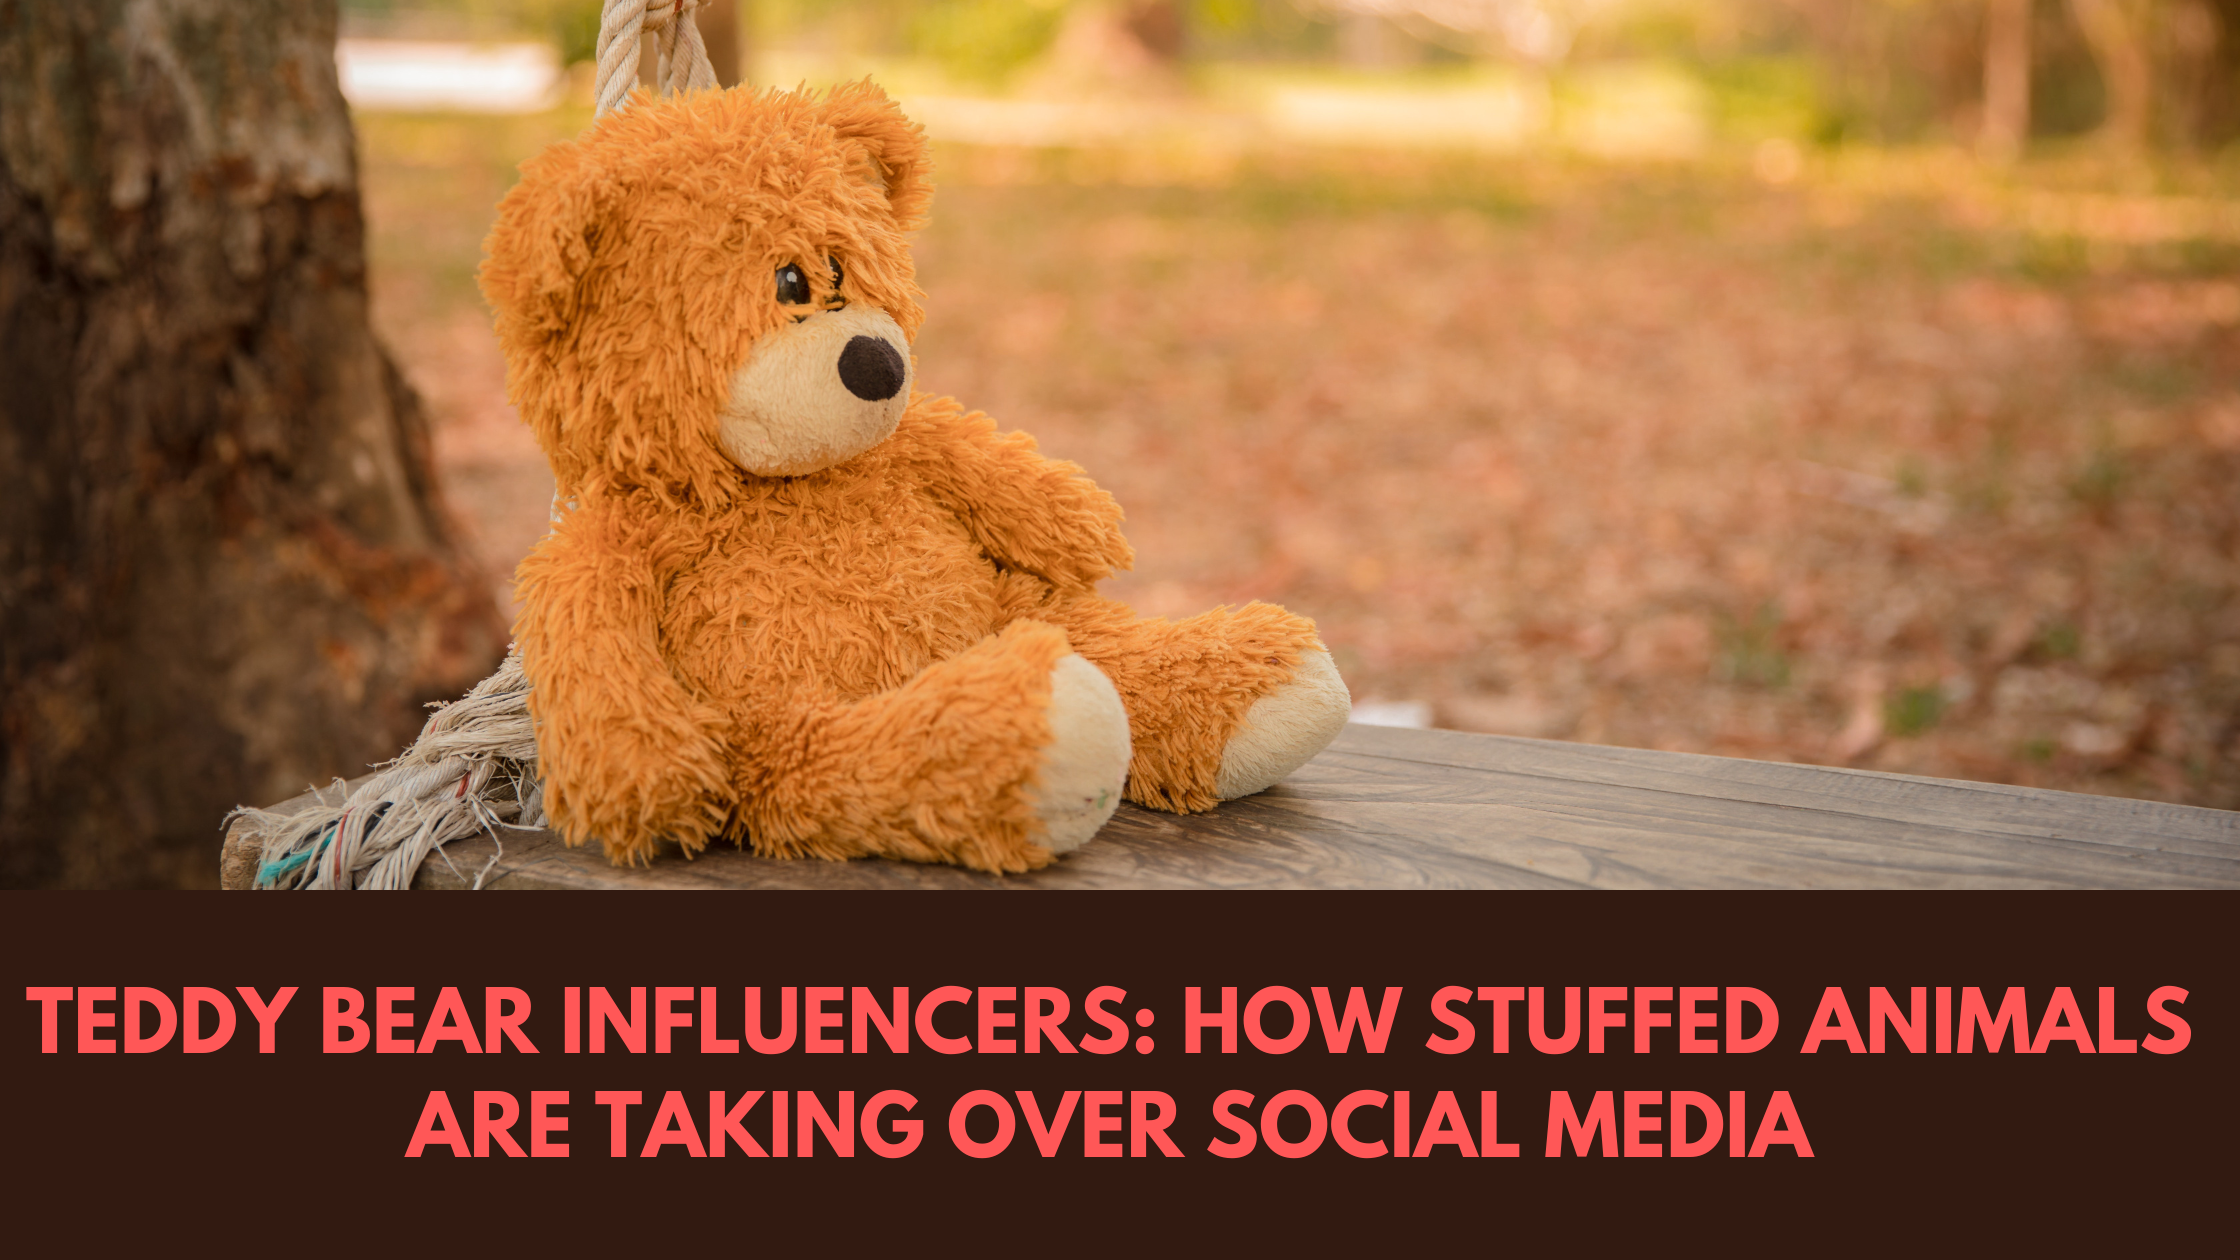 Teddy Bear Influencers: How Stuffed Animals Are Taking Over Social Media